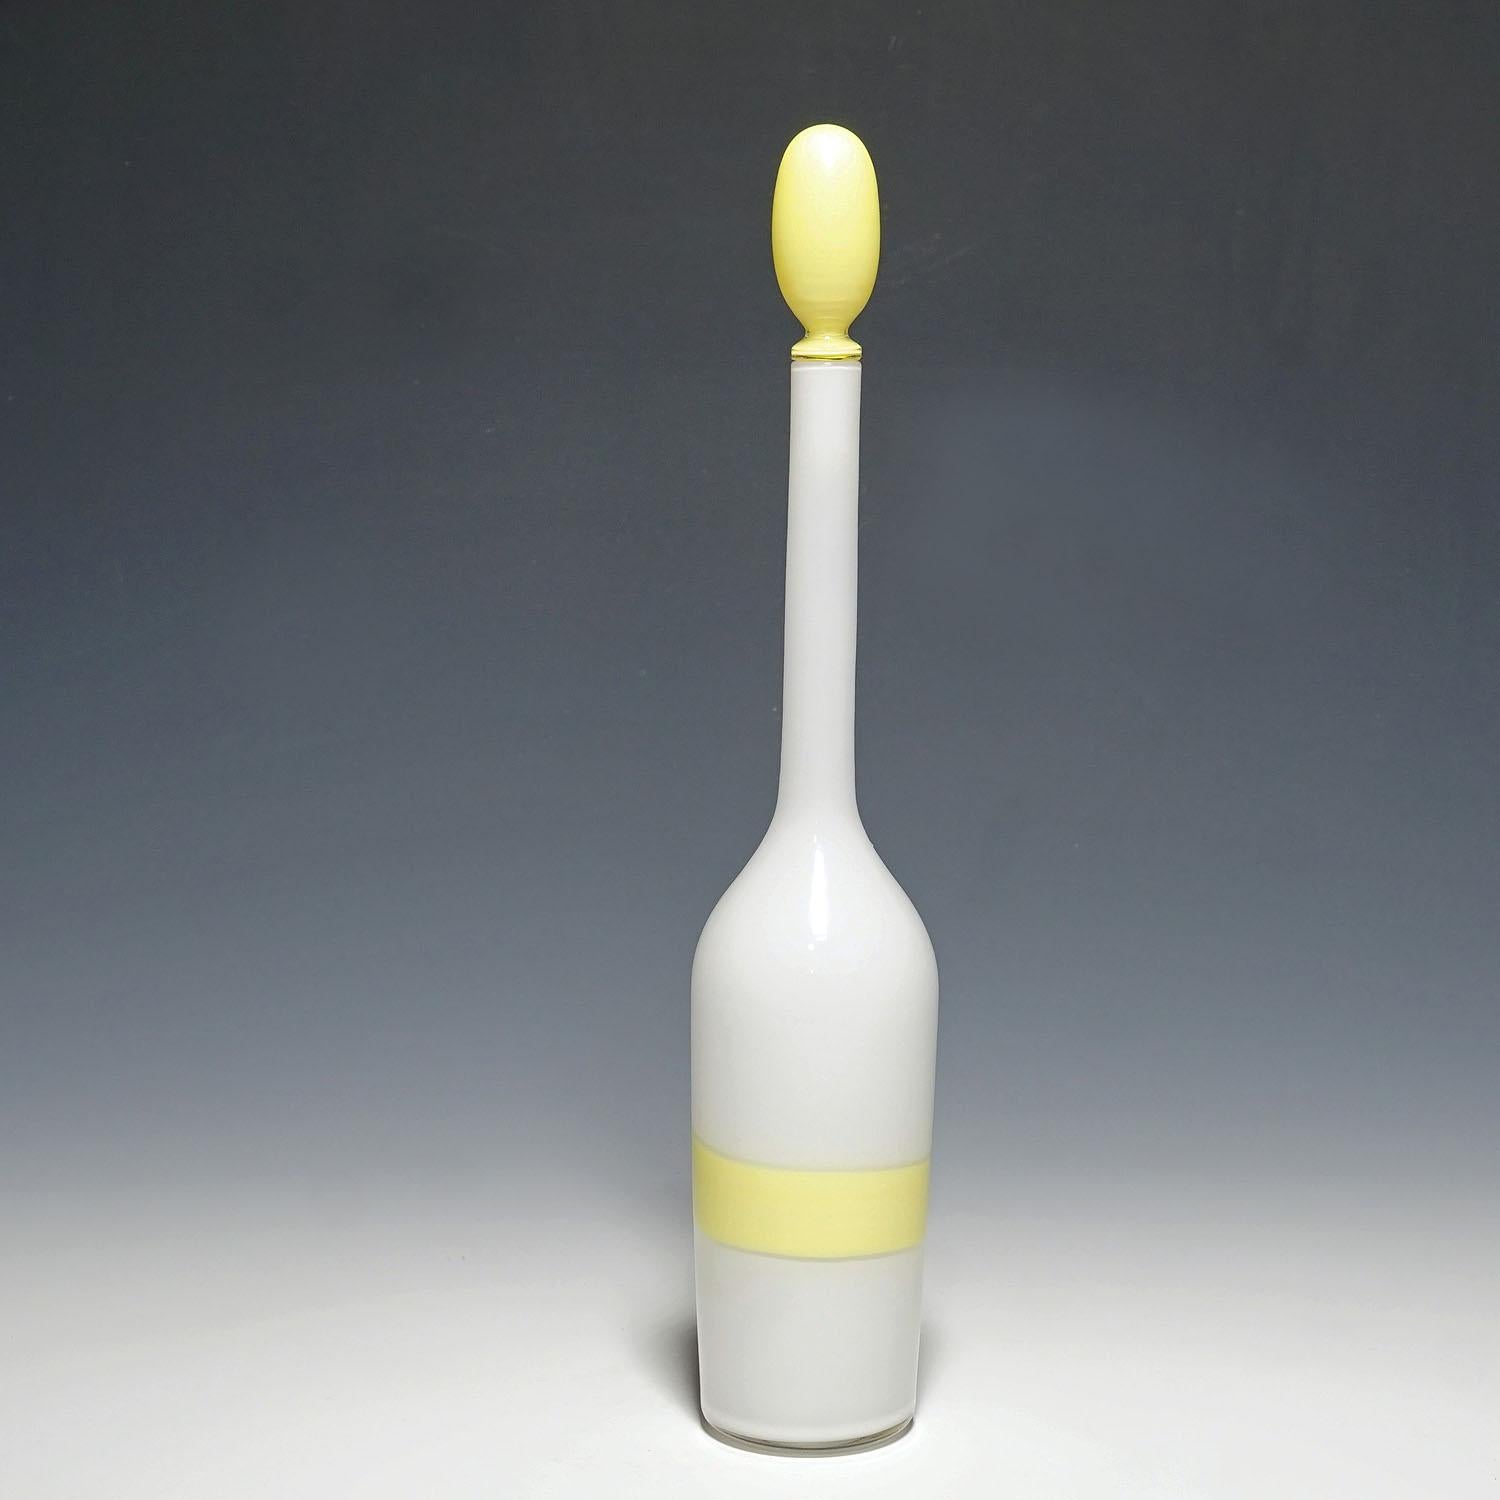 Venini art glass bottle with Fasce decoration in yellow, Murano 1950s

A large art glass bottle in white opaque glass with yellow stopper and a yellow 